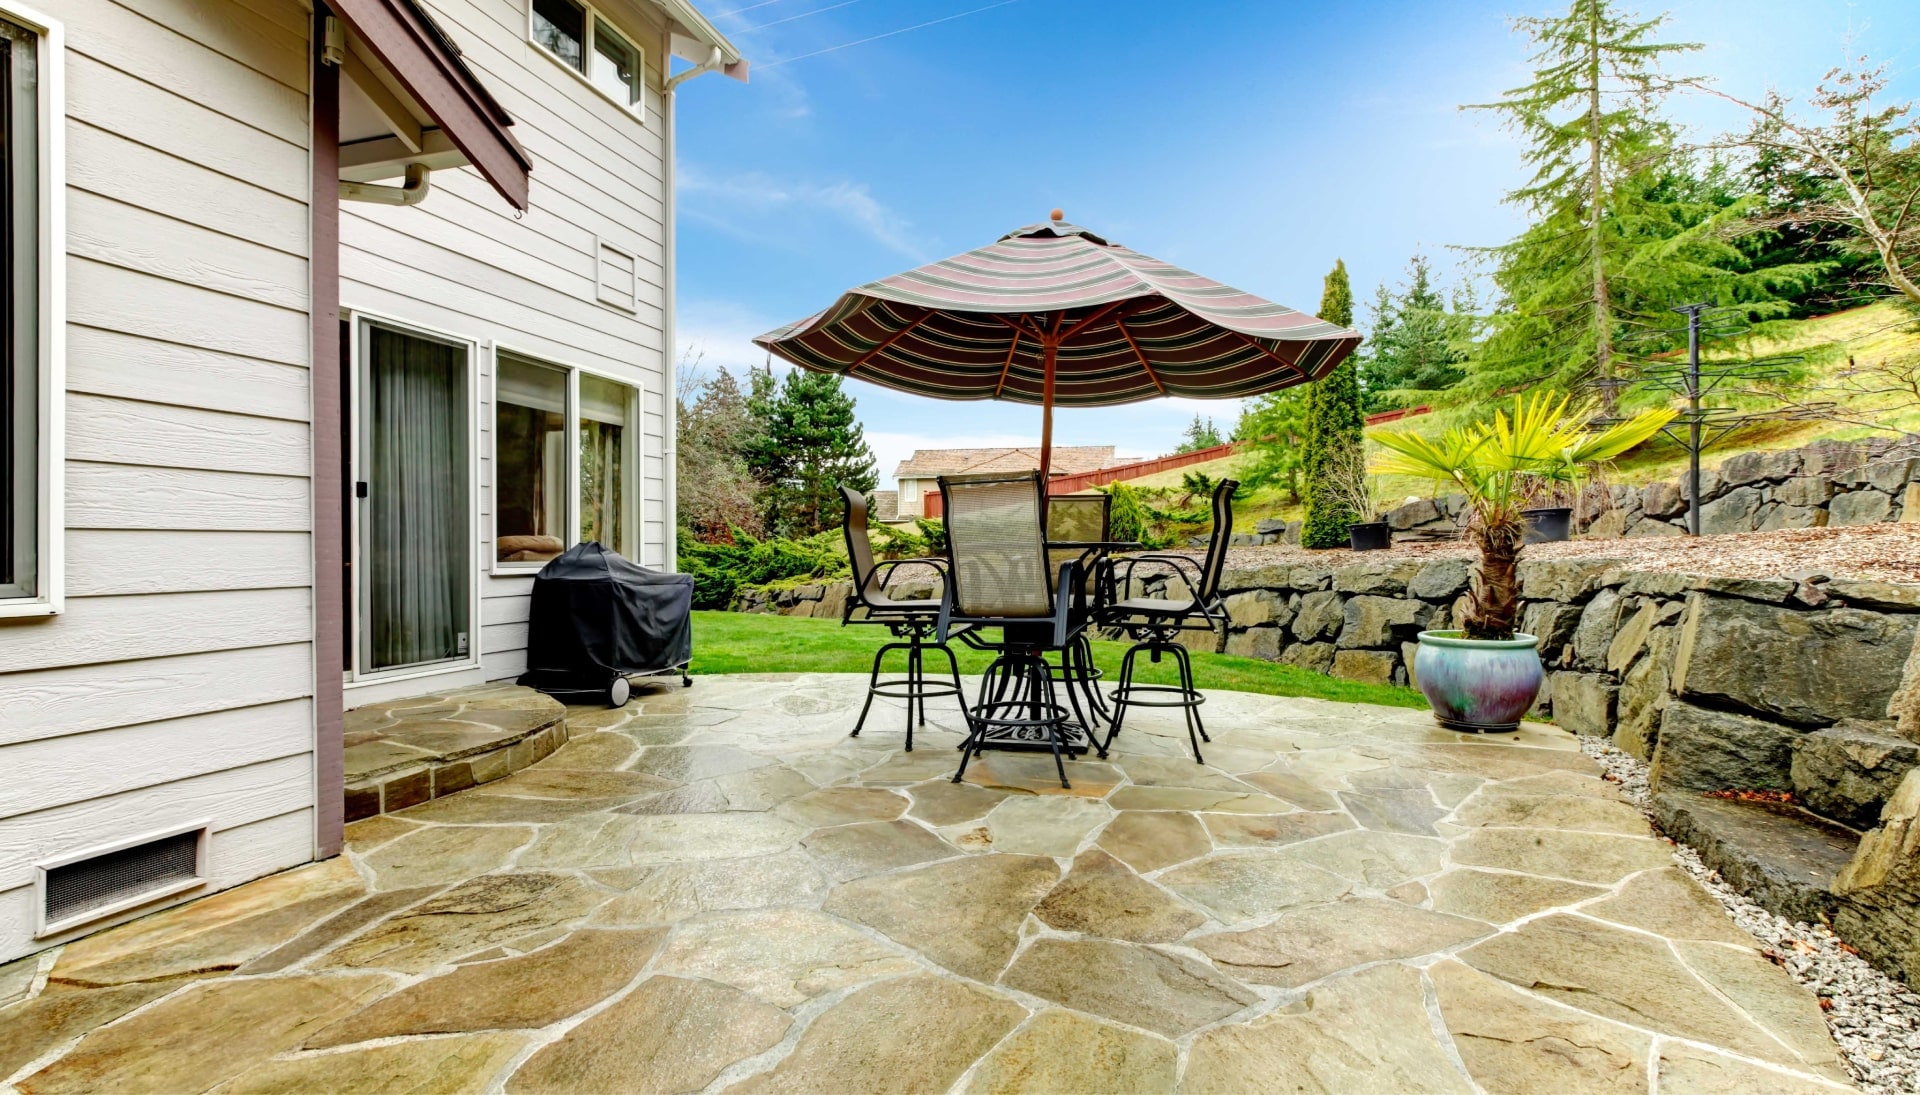 Beautifully Textured and Patterned Concrete Patios in Helena, Montana area!